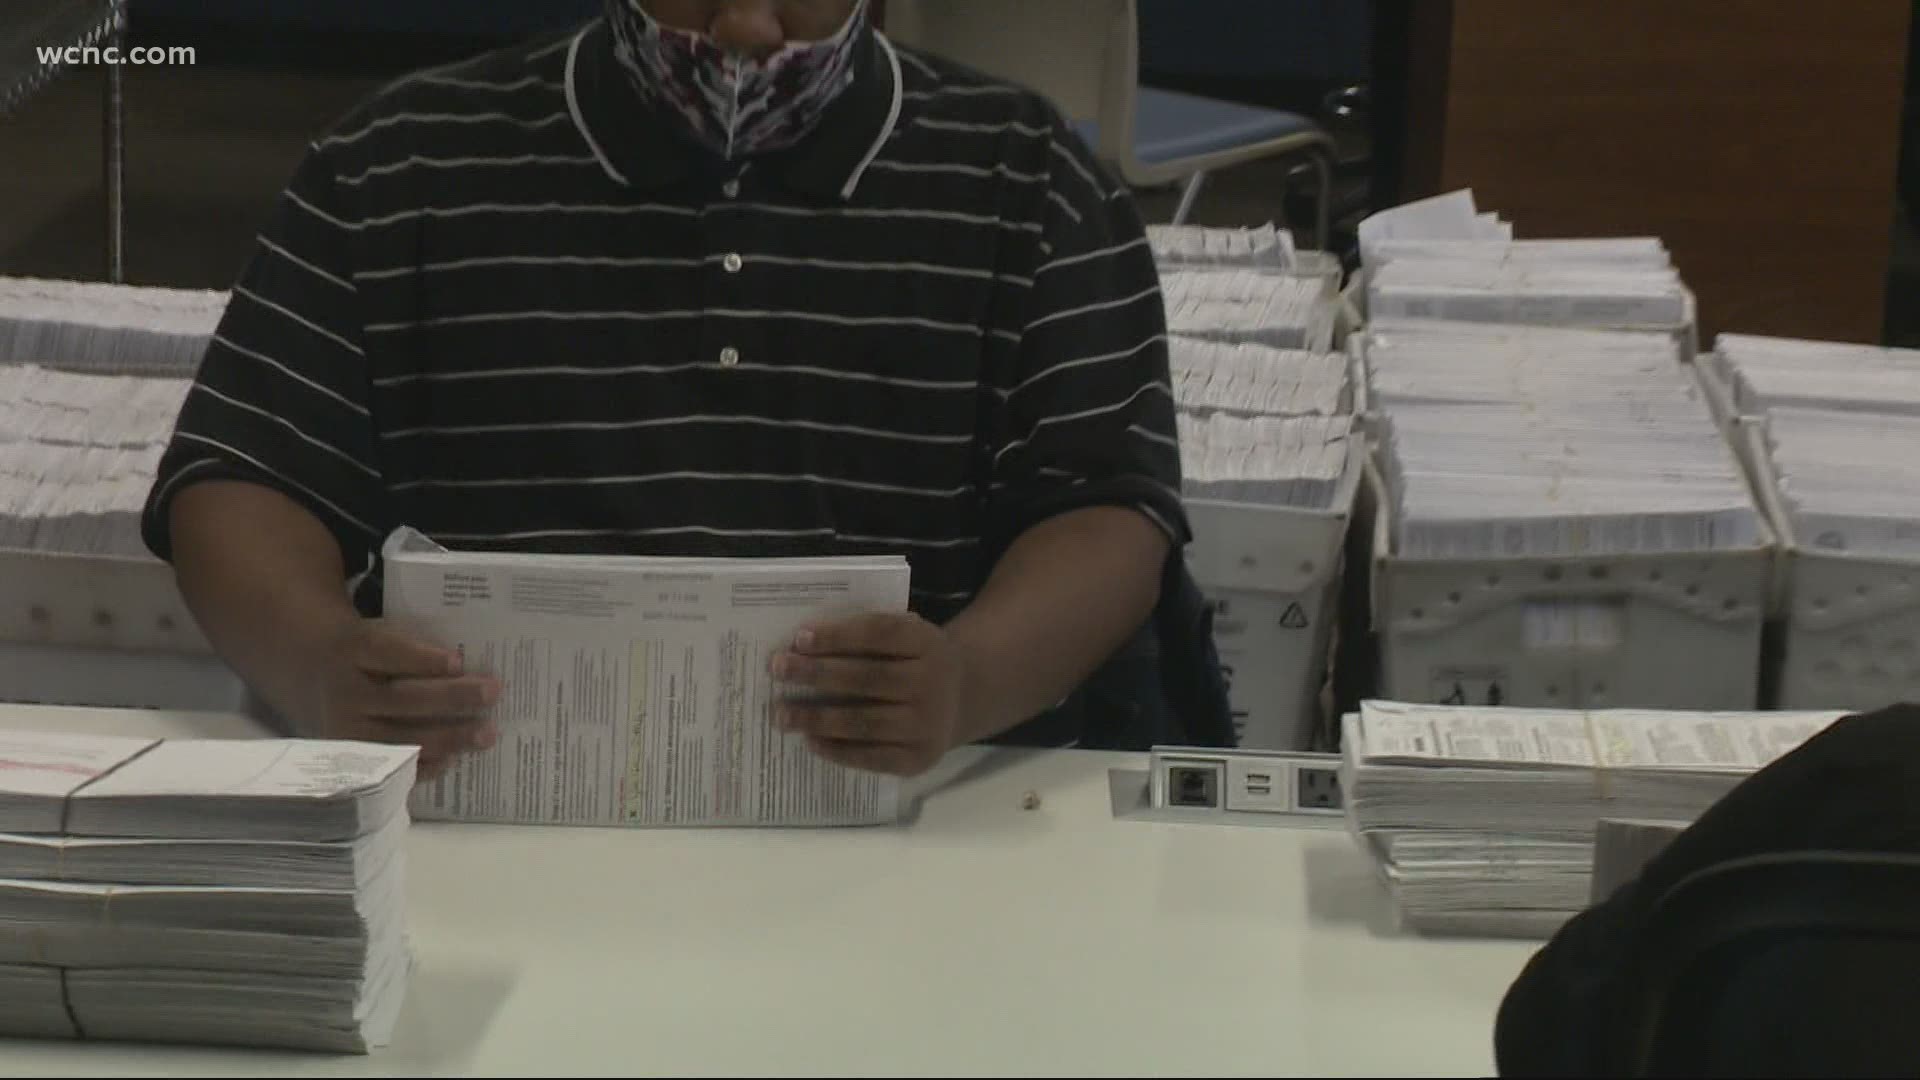 We look into what's being done to secure and protect these ballots as the election is over a month away.